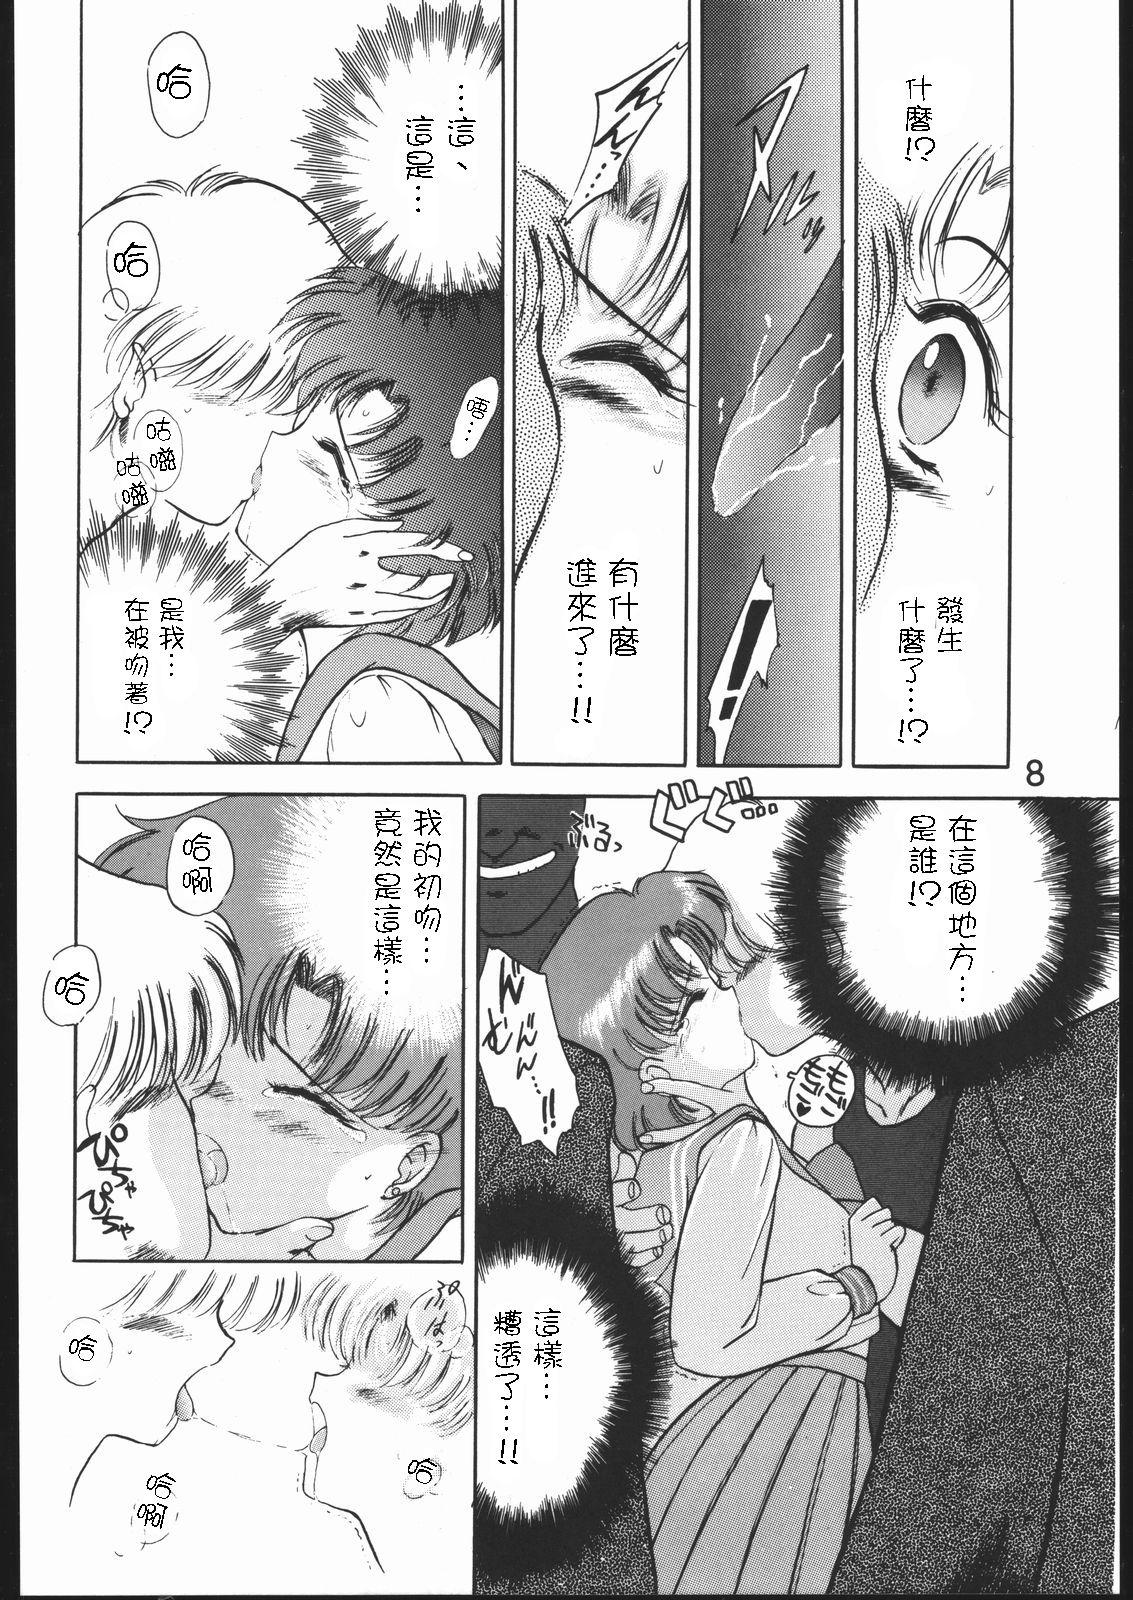 Gay Outinpublic SUBMISSION MERCURY PLUS - Sailor moon Doctor Sex - Page 8